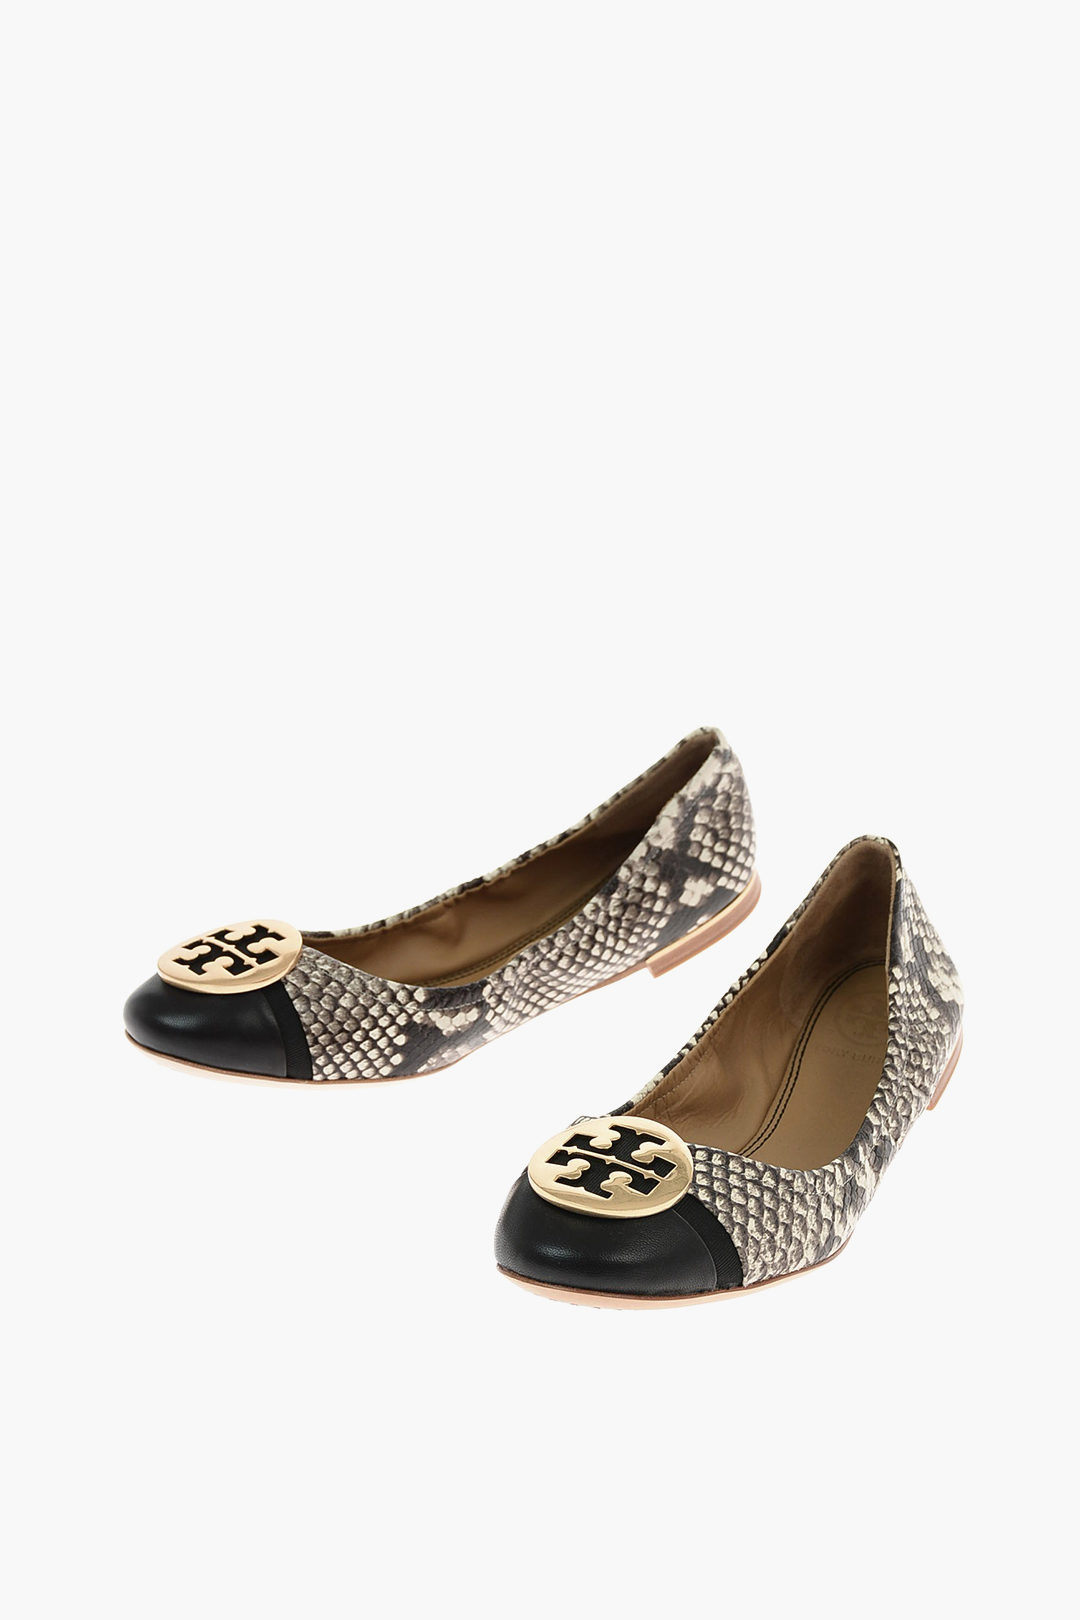 Tory Burch snake print leather Ballet flats women - Glamood Outlet